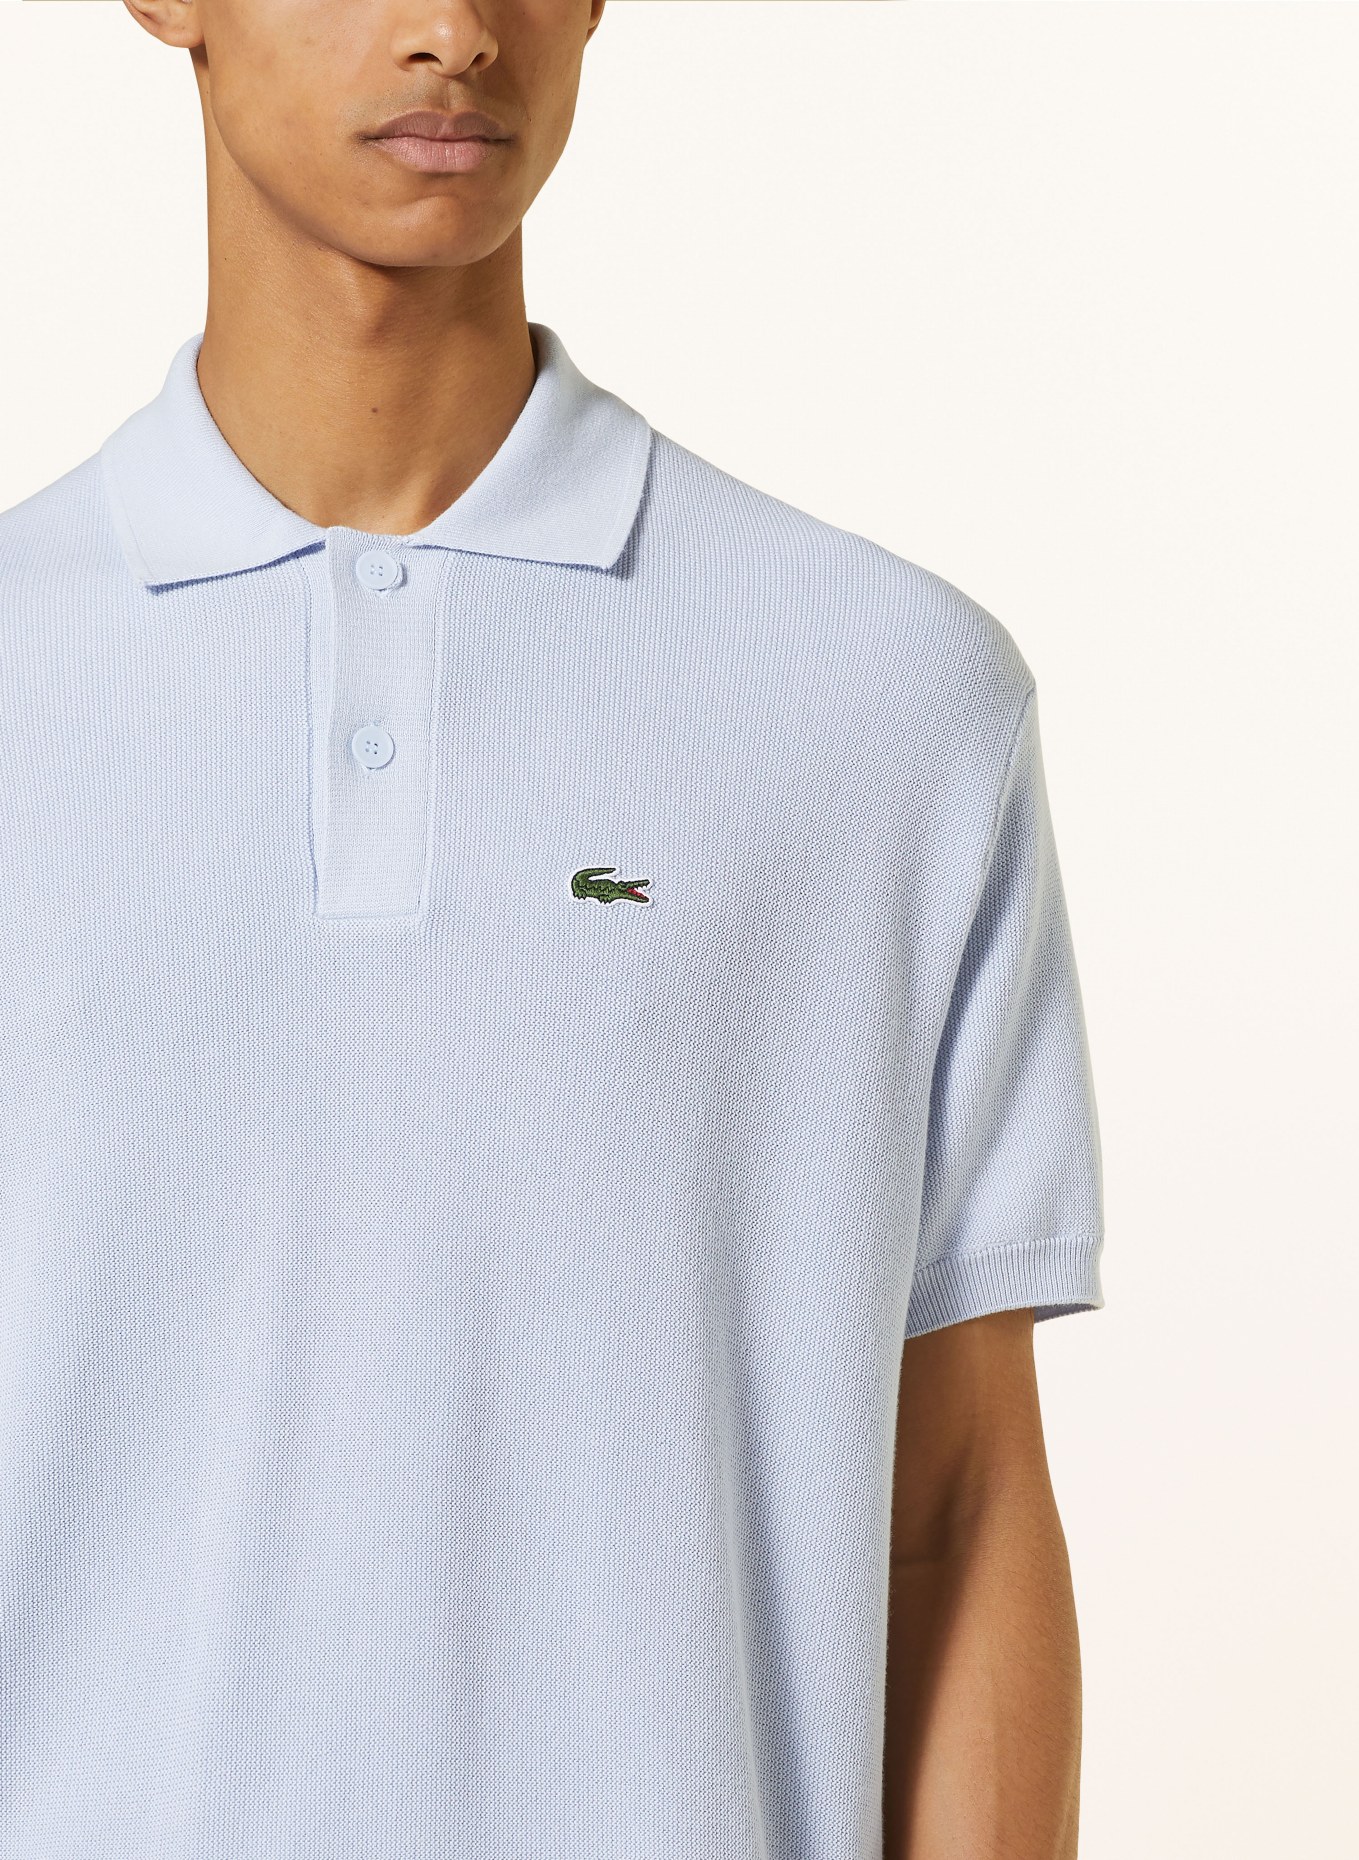 LACOSTE Strick-Poloshirt Relaxed Fit, Farbe: HELLBLAU (Bild 4)